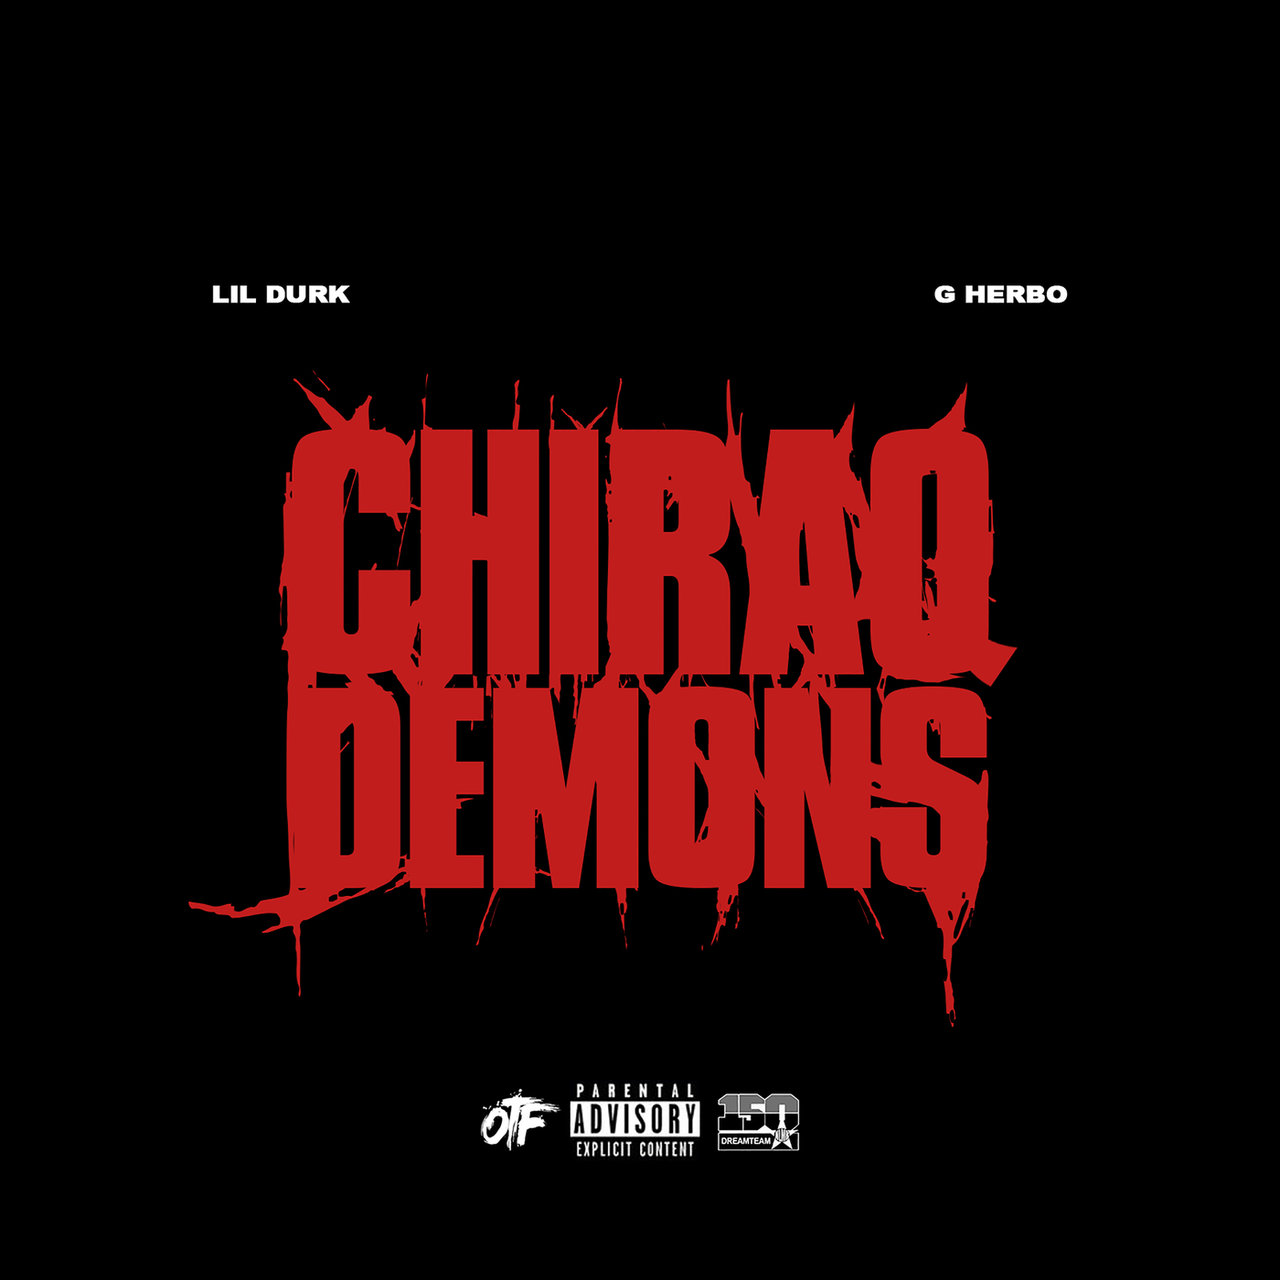 Lil Durk - Chiraq Demons (ft. G Herbo) (Cover)